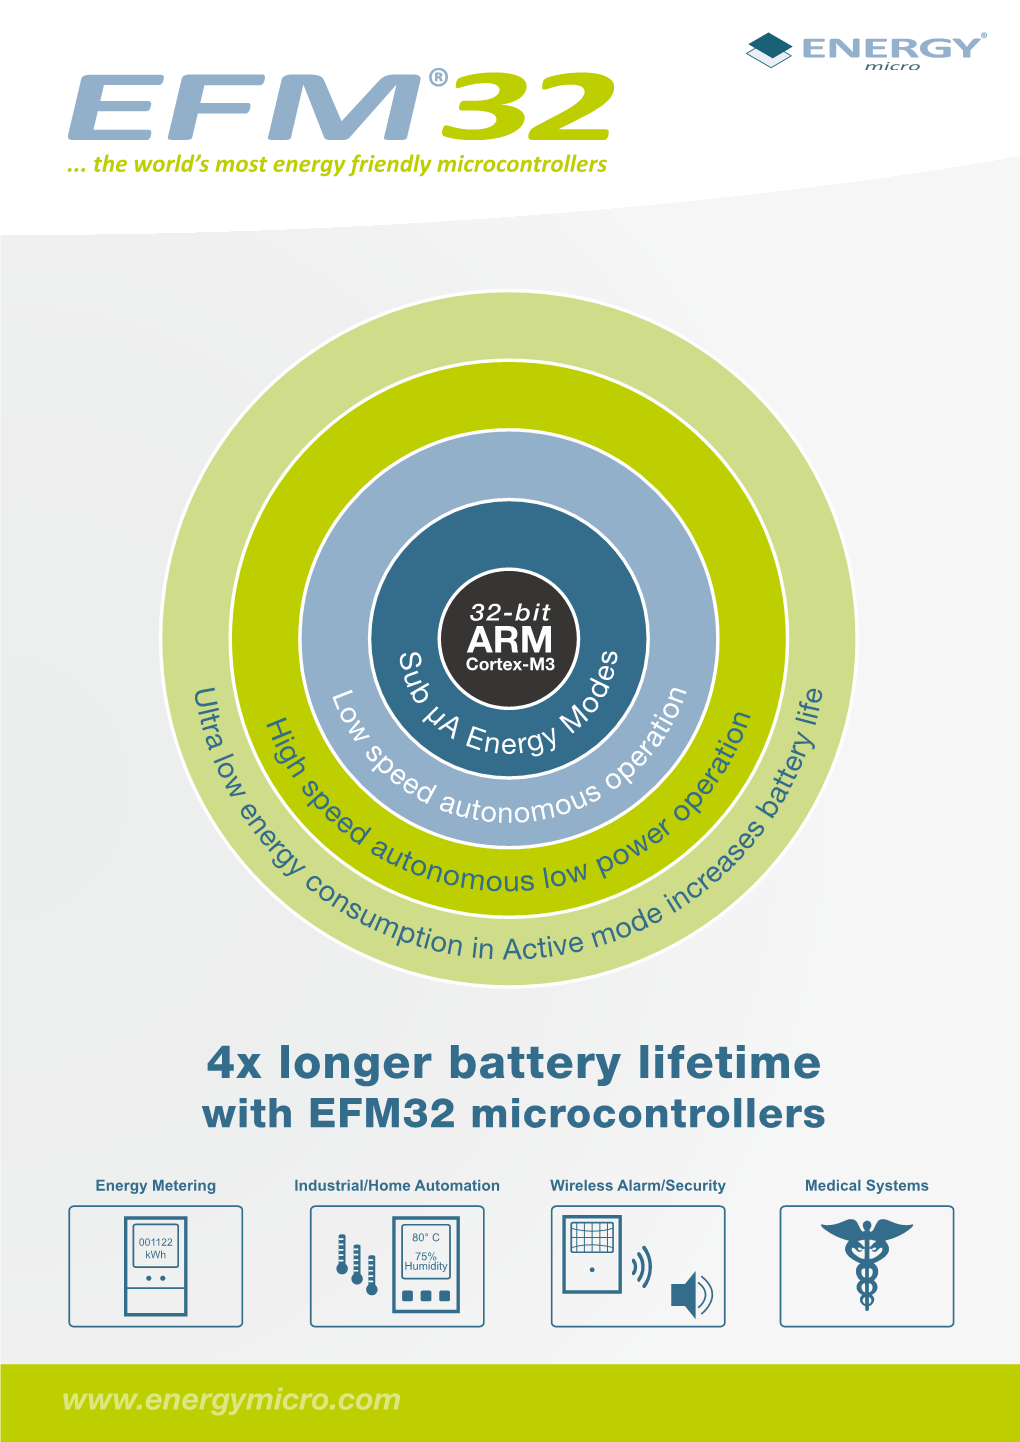 4X Longer Battery Lifetime with EFM32 Microcontrollers